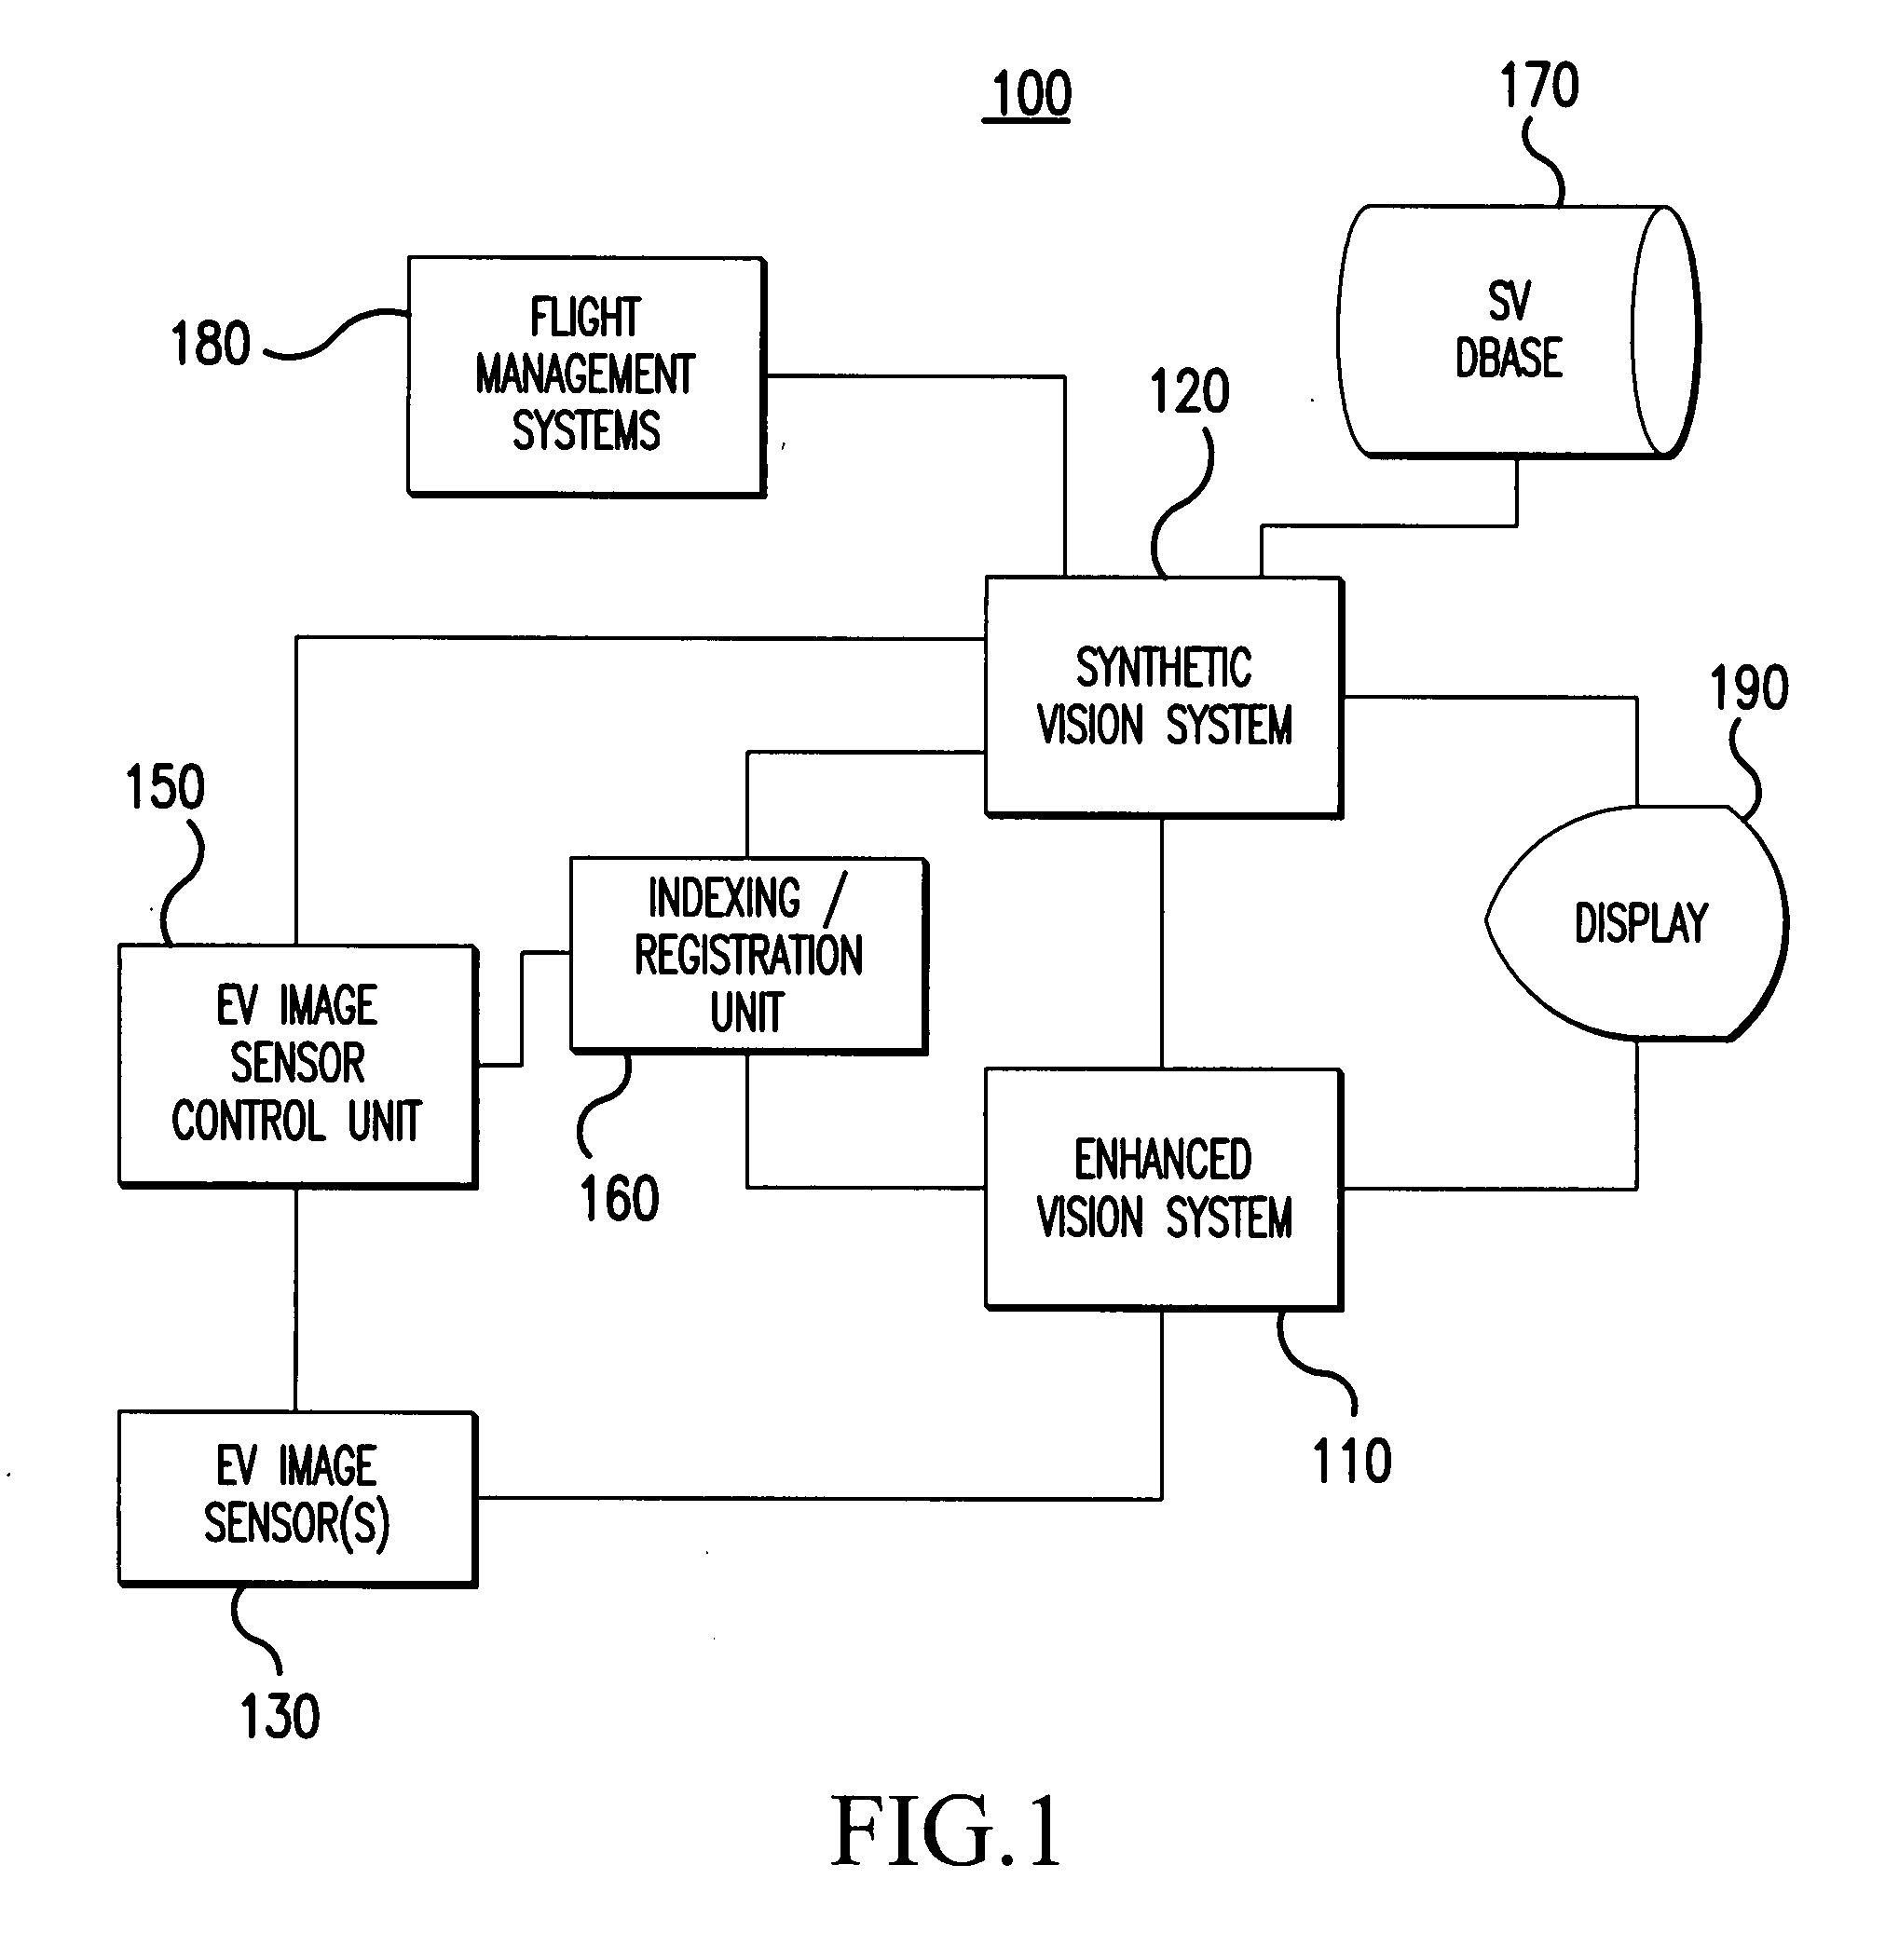 Vehicle display system and method with enhanced vision system and synthetic vision system image display